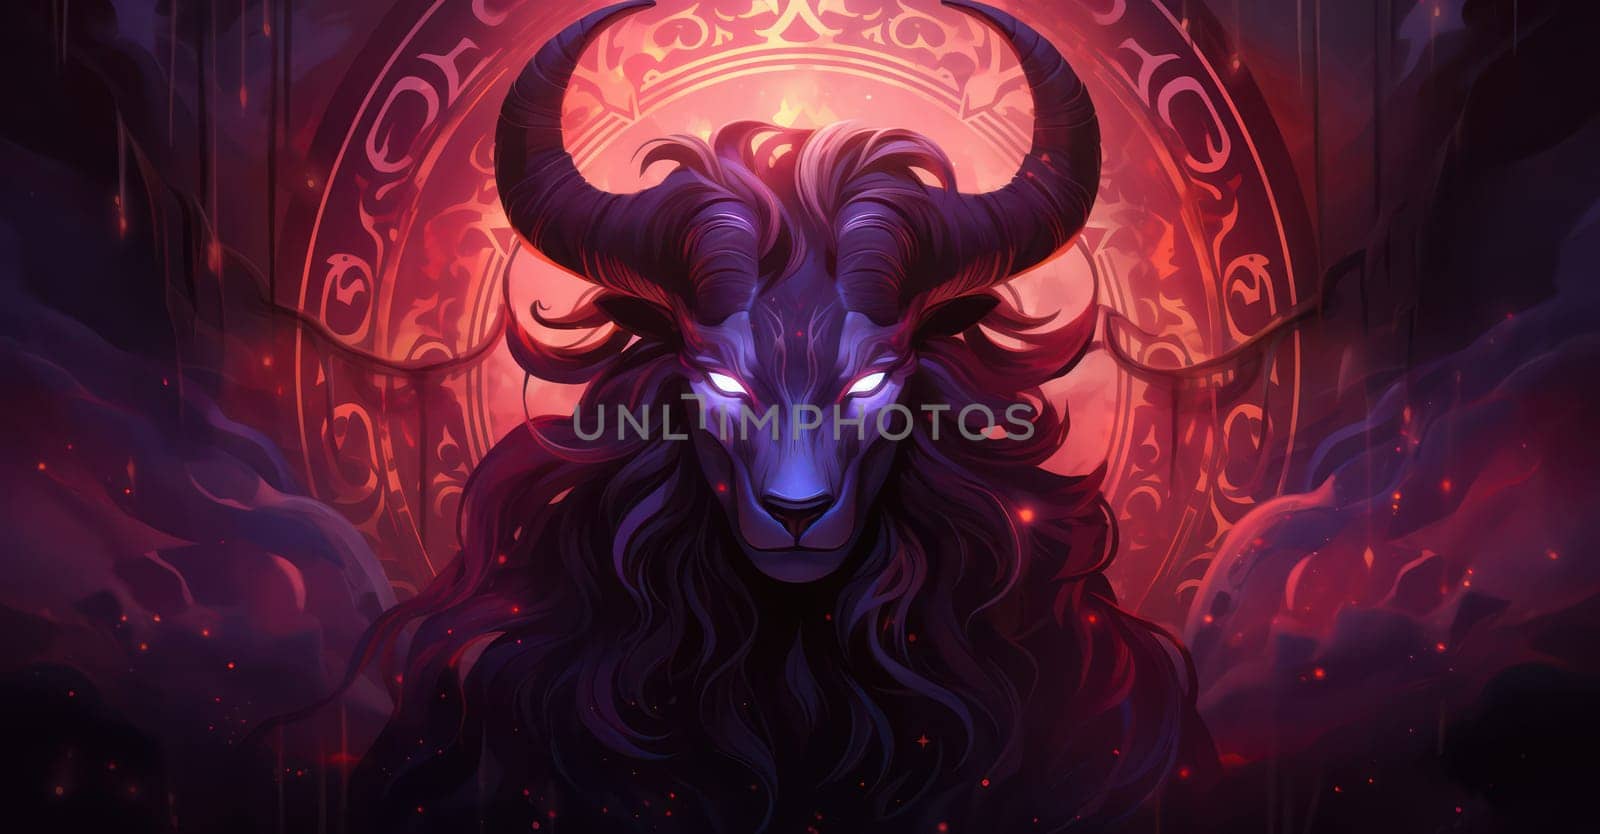 Sacred Horn: A Mystic Illustration of a Wild Ram, Symbol of Witchcraft and Esoteric Spirit